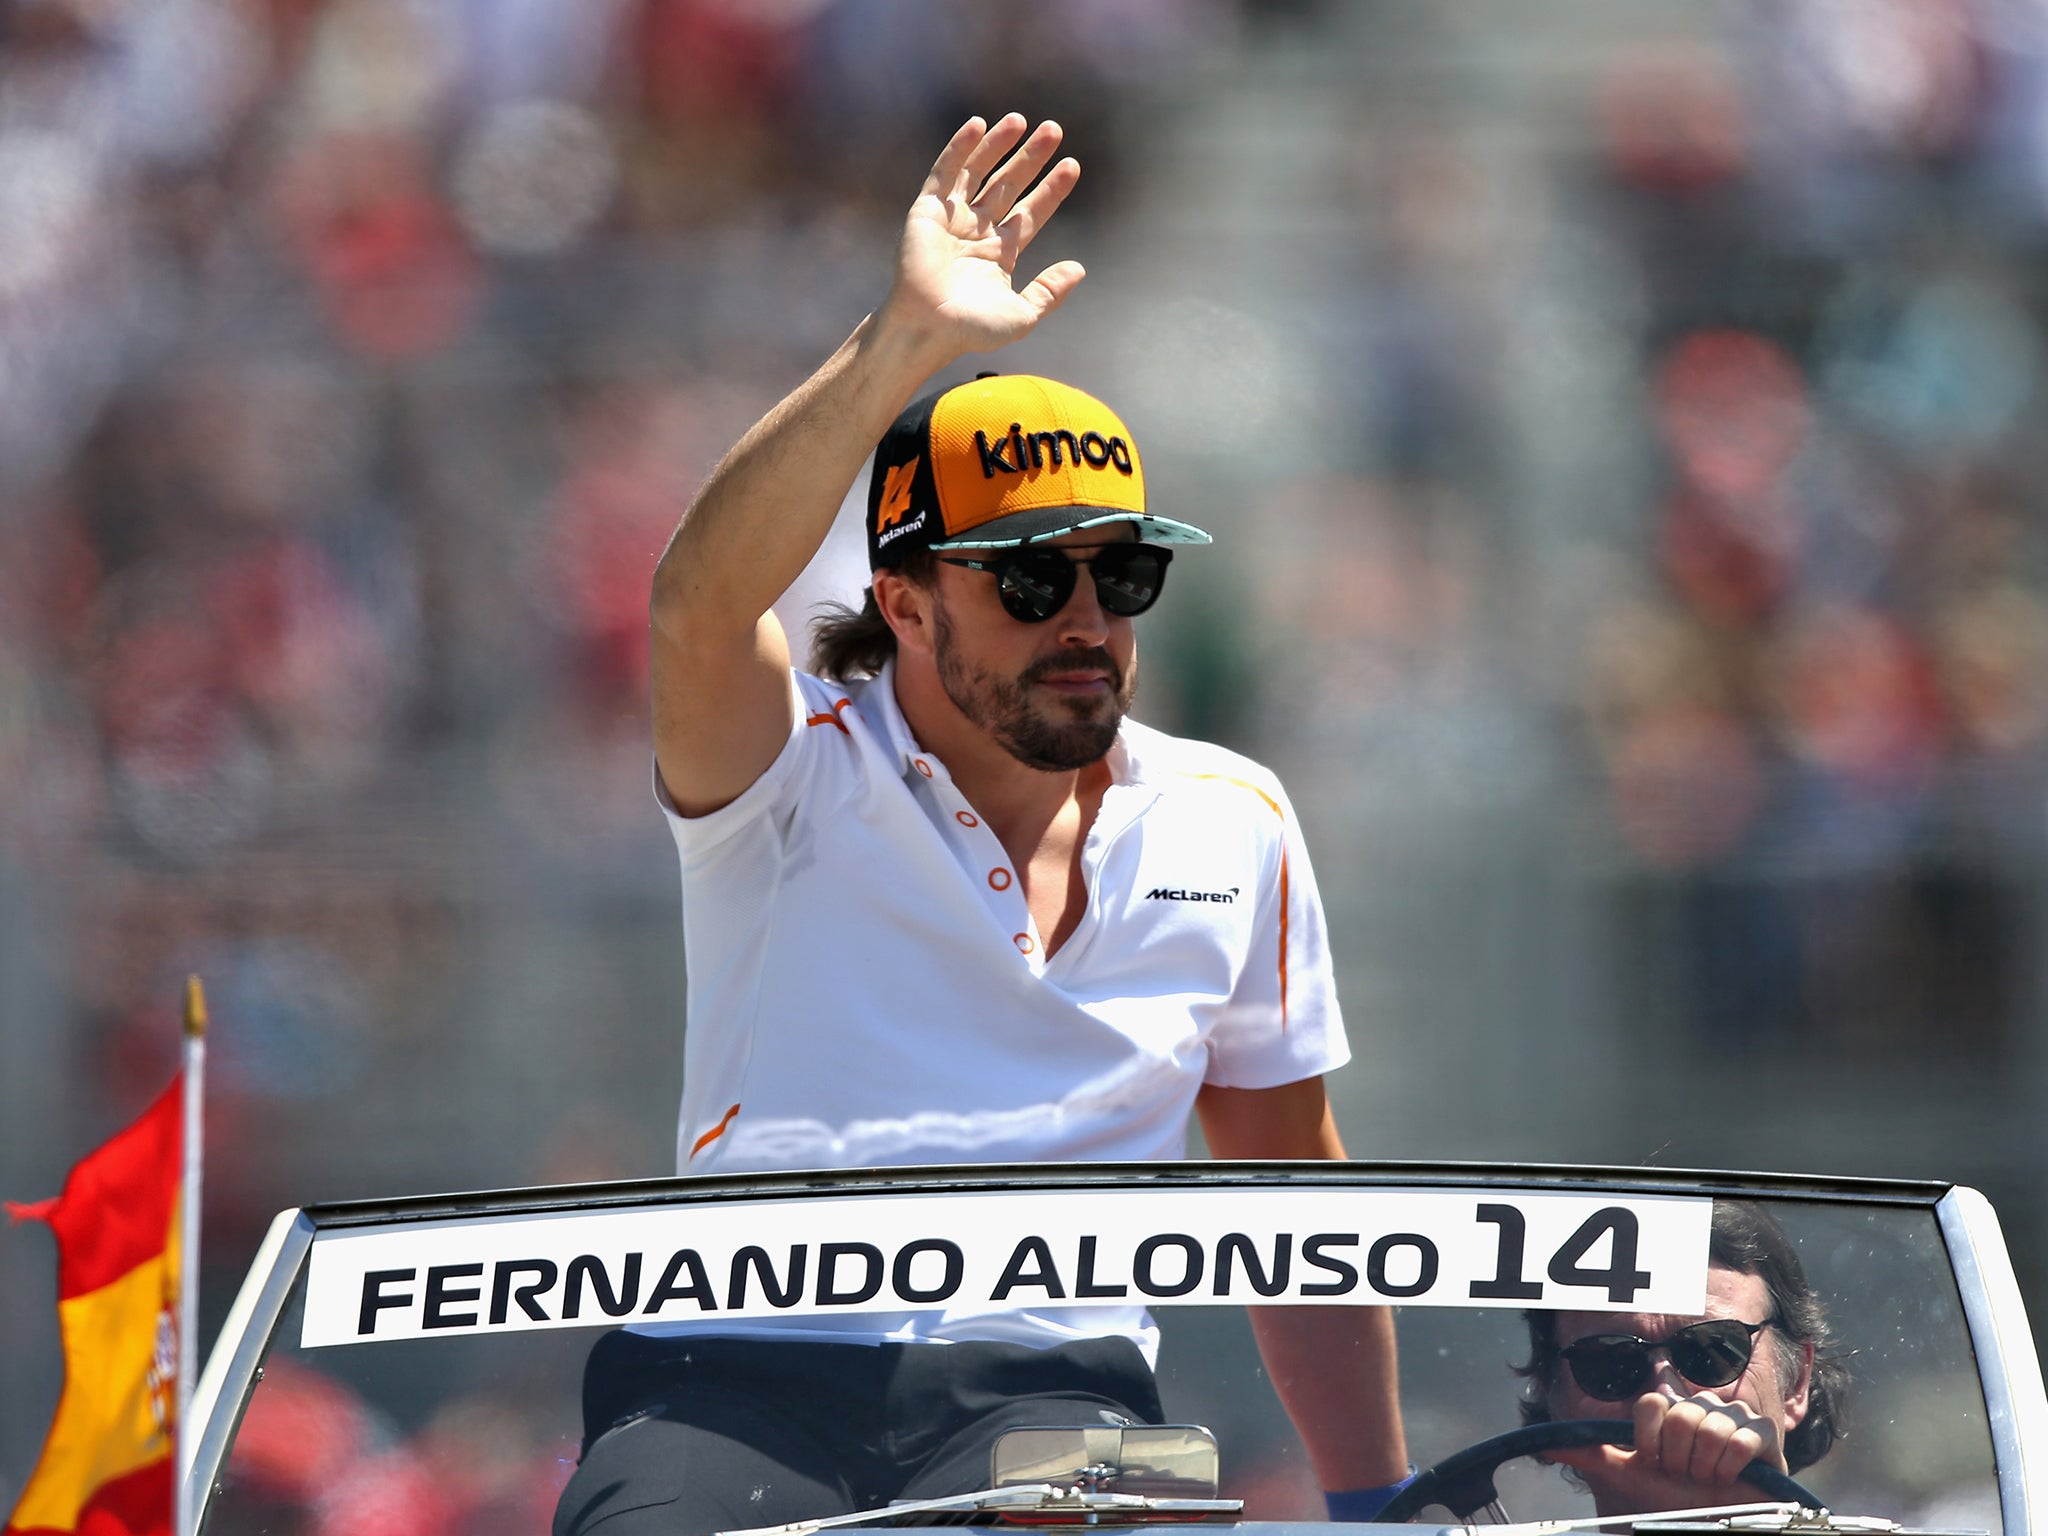 Fernando Alonso takes part in this year's Le Mans 24 Hours for the first time